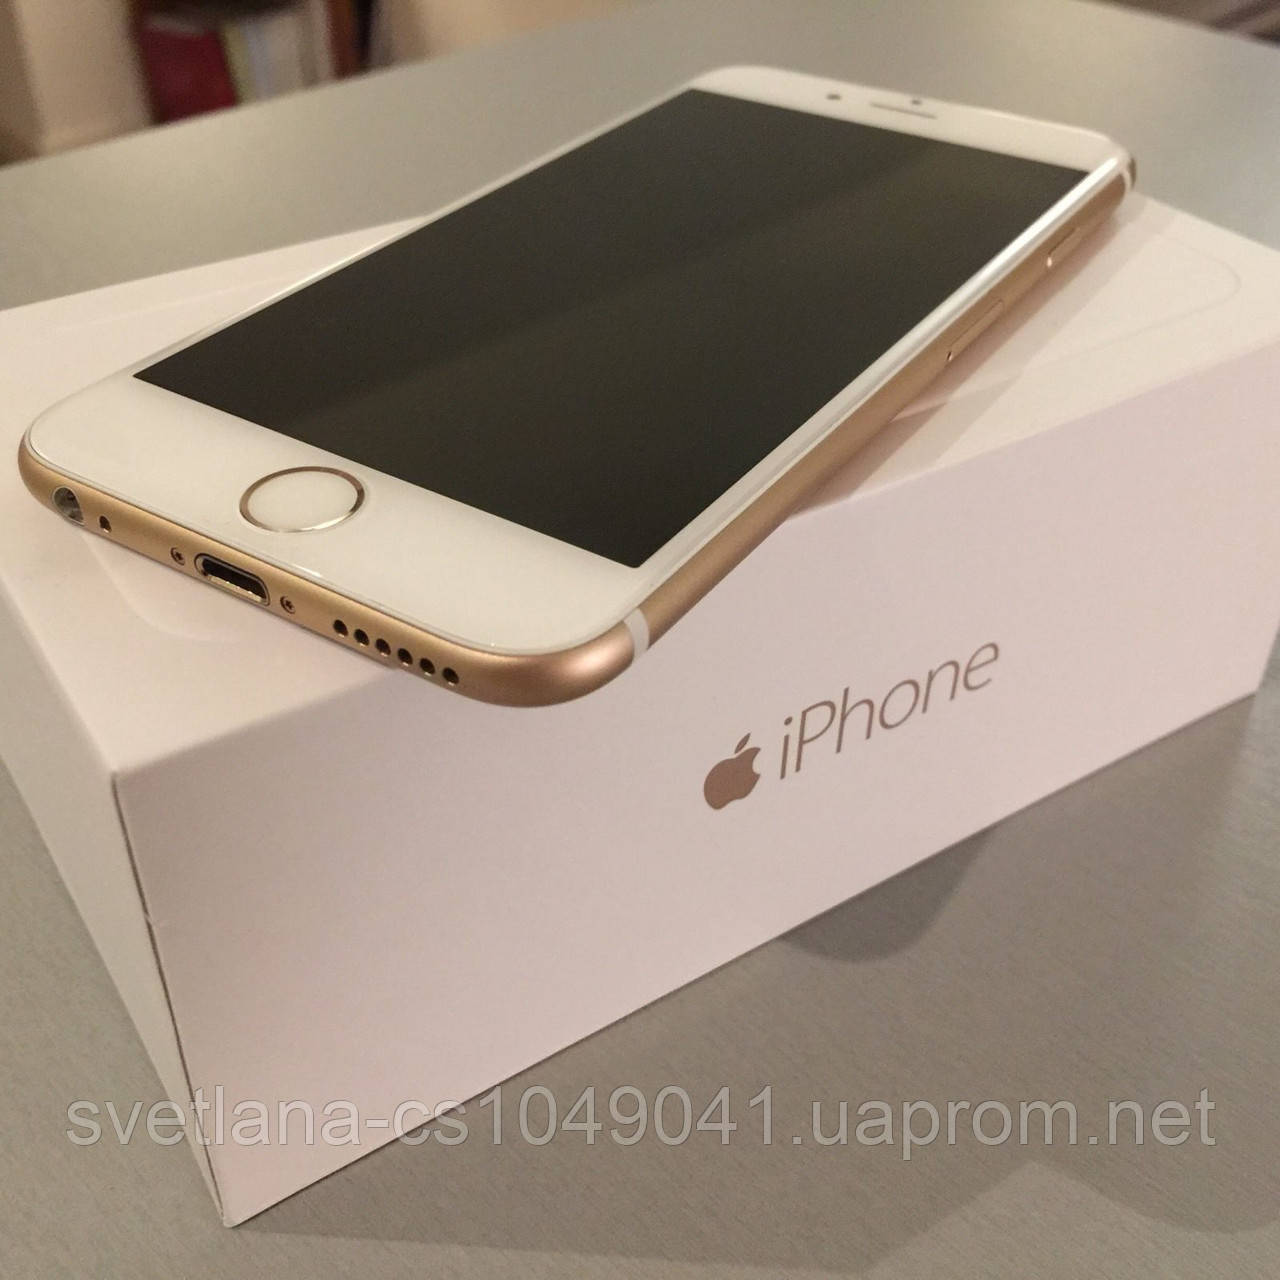 IPhone 6 64 GOLD (без Touch id)